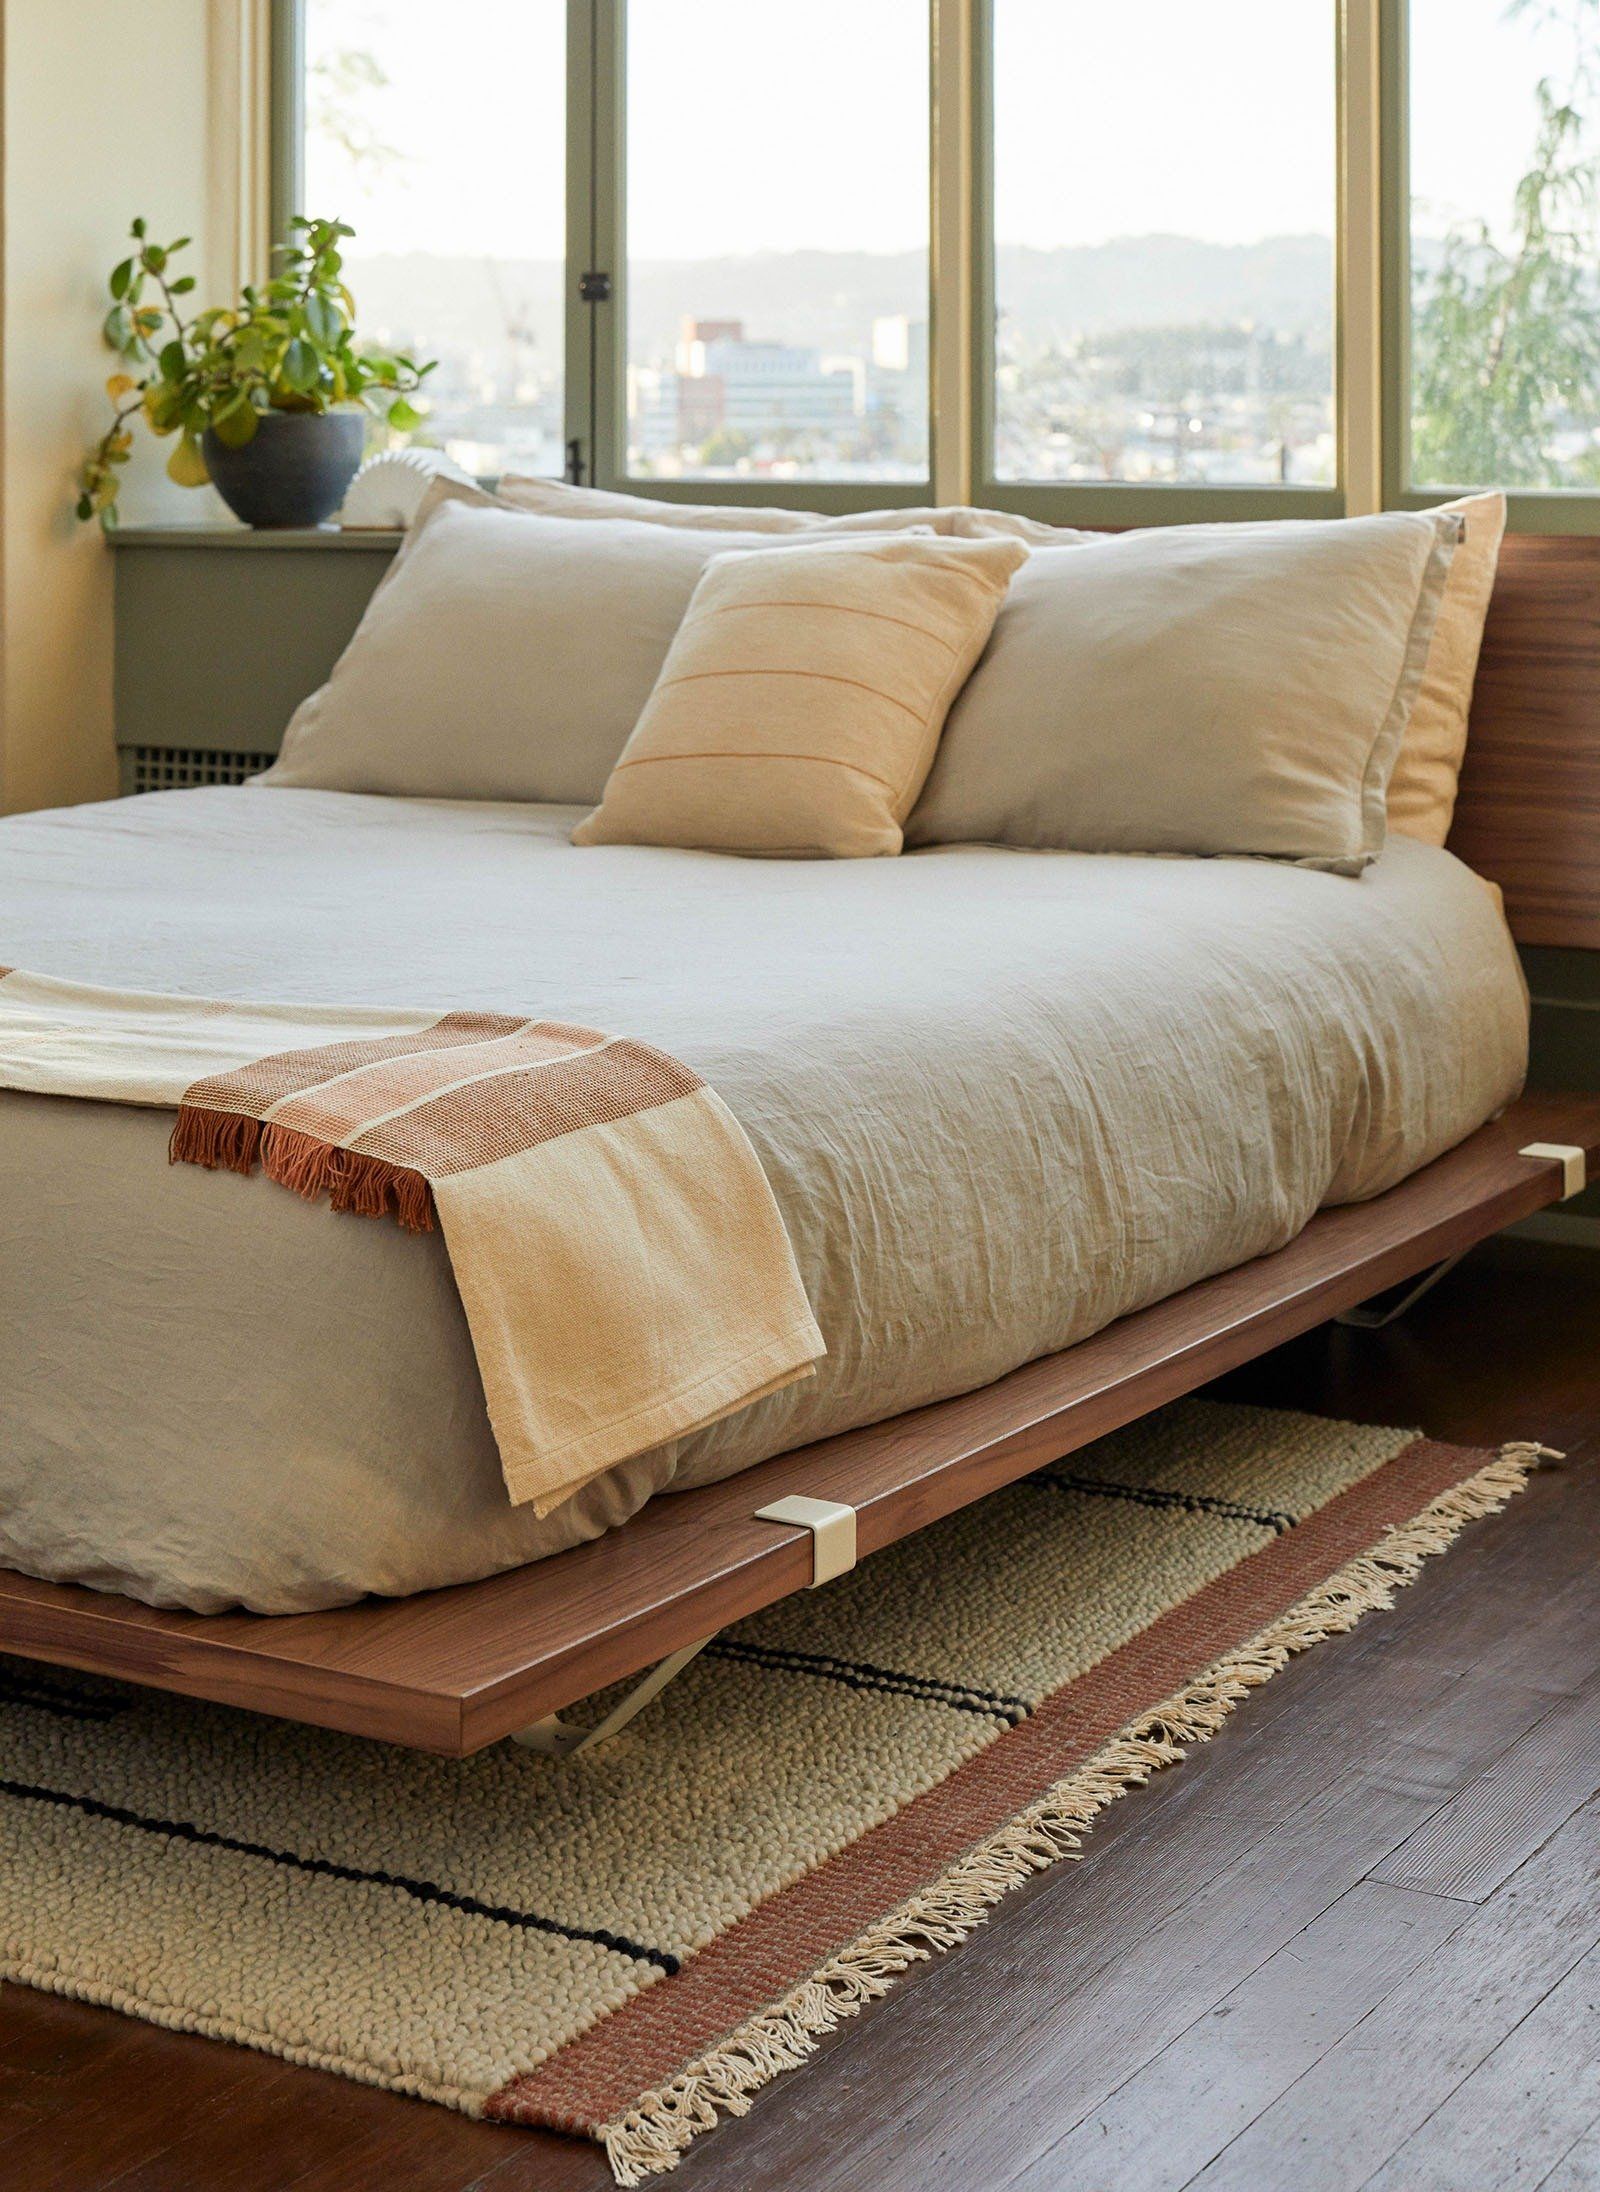 Bed Frame Designs: Stylish and Functional Solutions for Your Bedroom